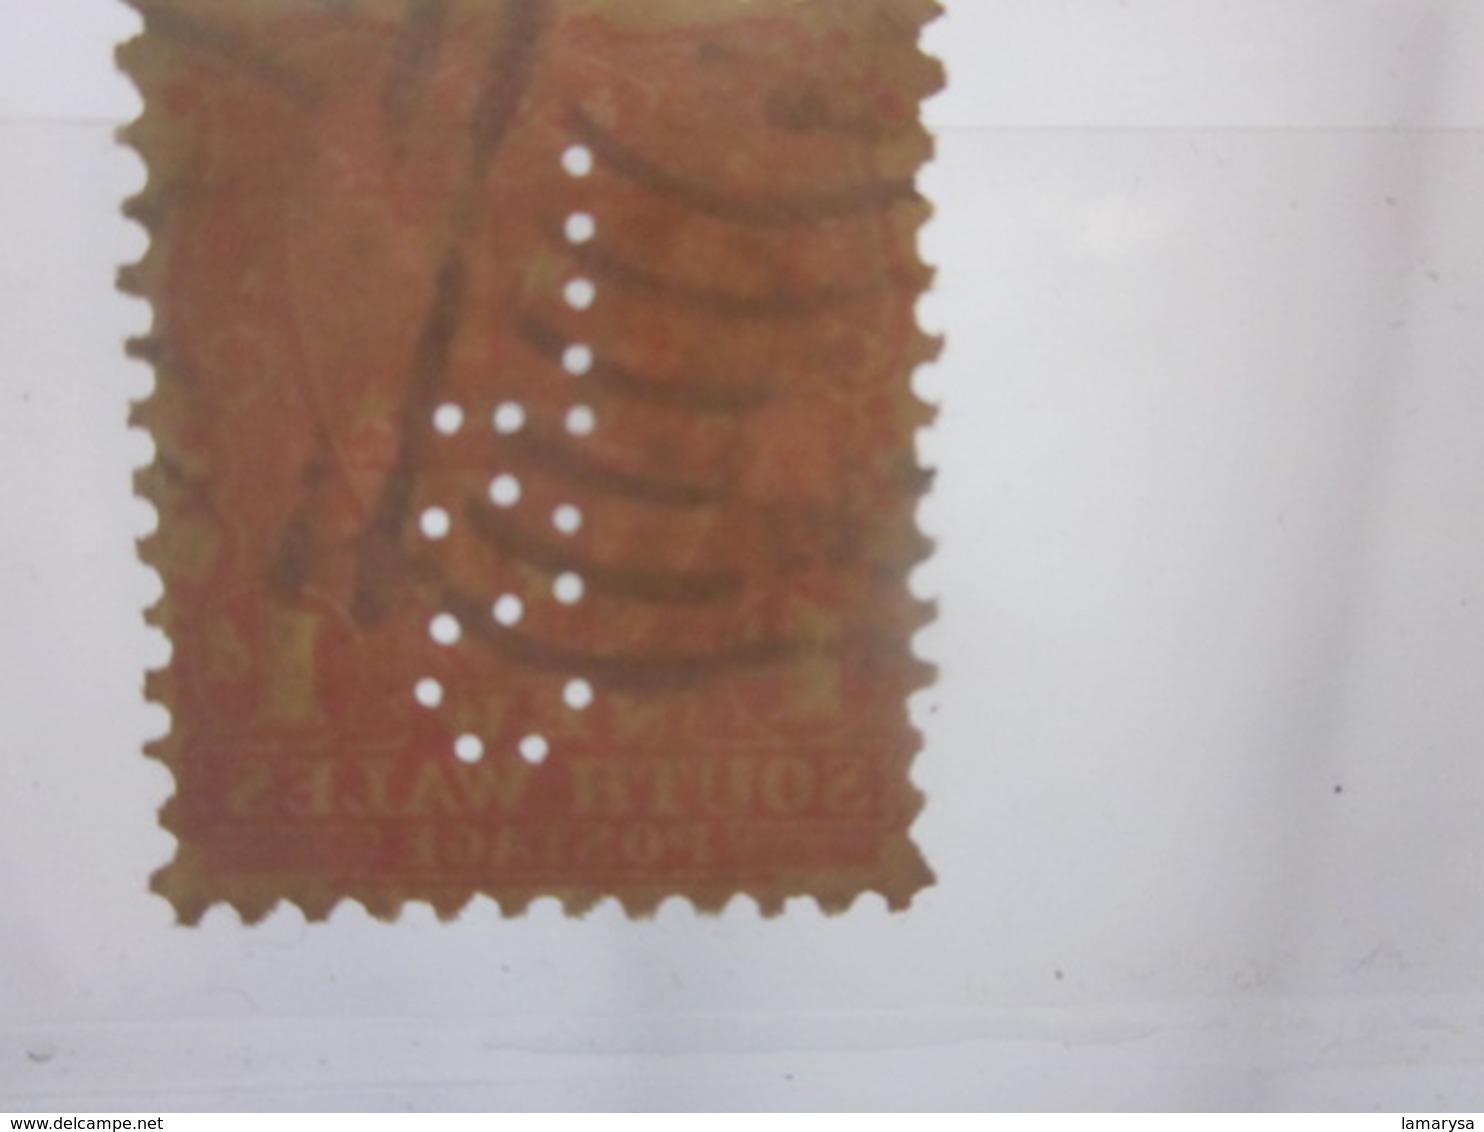 Stamp Timbre AUSTRALIE COLONY NEW SOUTH WALES Perforés Perforé Perforés Perfin Perfins Stamps Perforated Perforations LS - Perfin